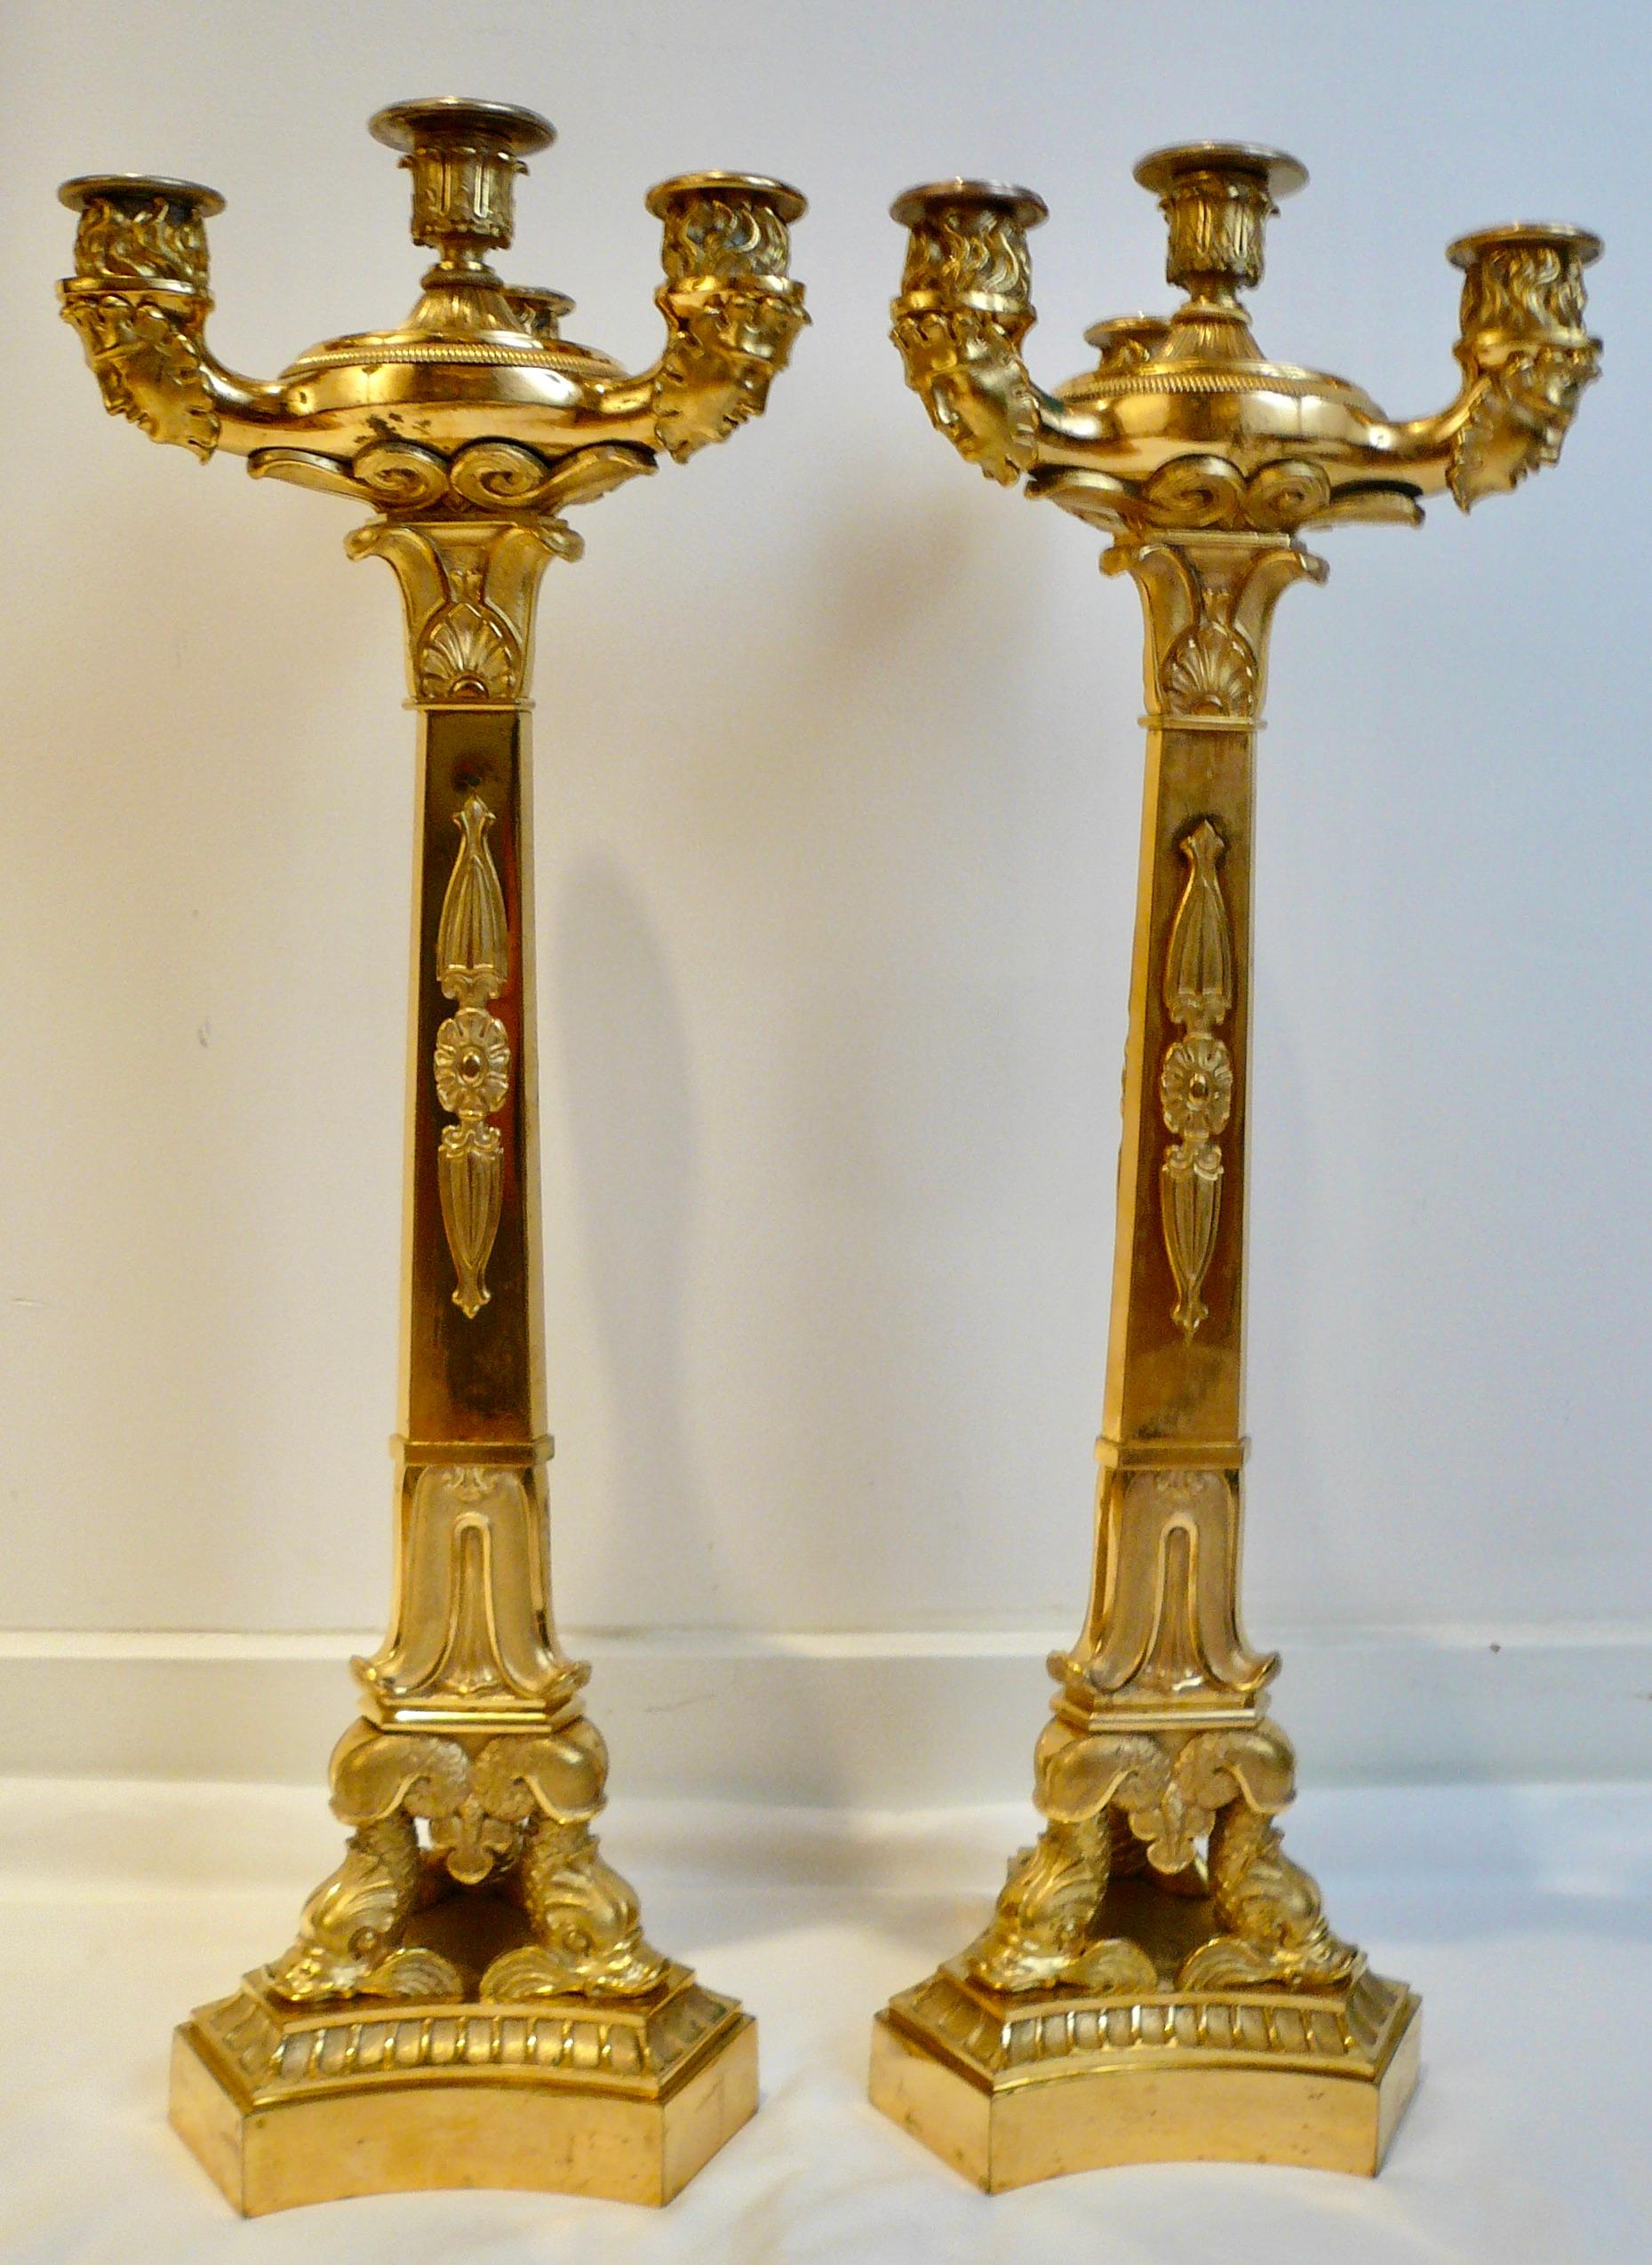 This impressive pair of Classical gilt bronze candelabra in the manner of Pierre Philippe Thomire, are beautifully made in cast bronze and have hand chased details. They feature dolphins on triangular plinth form bases supporting tapering columns.